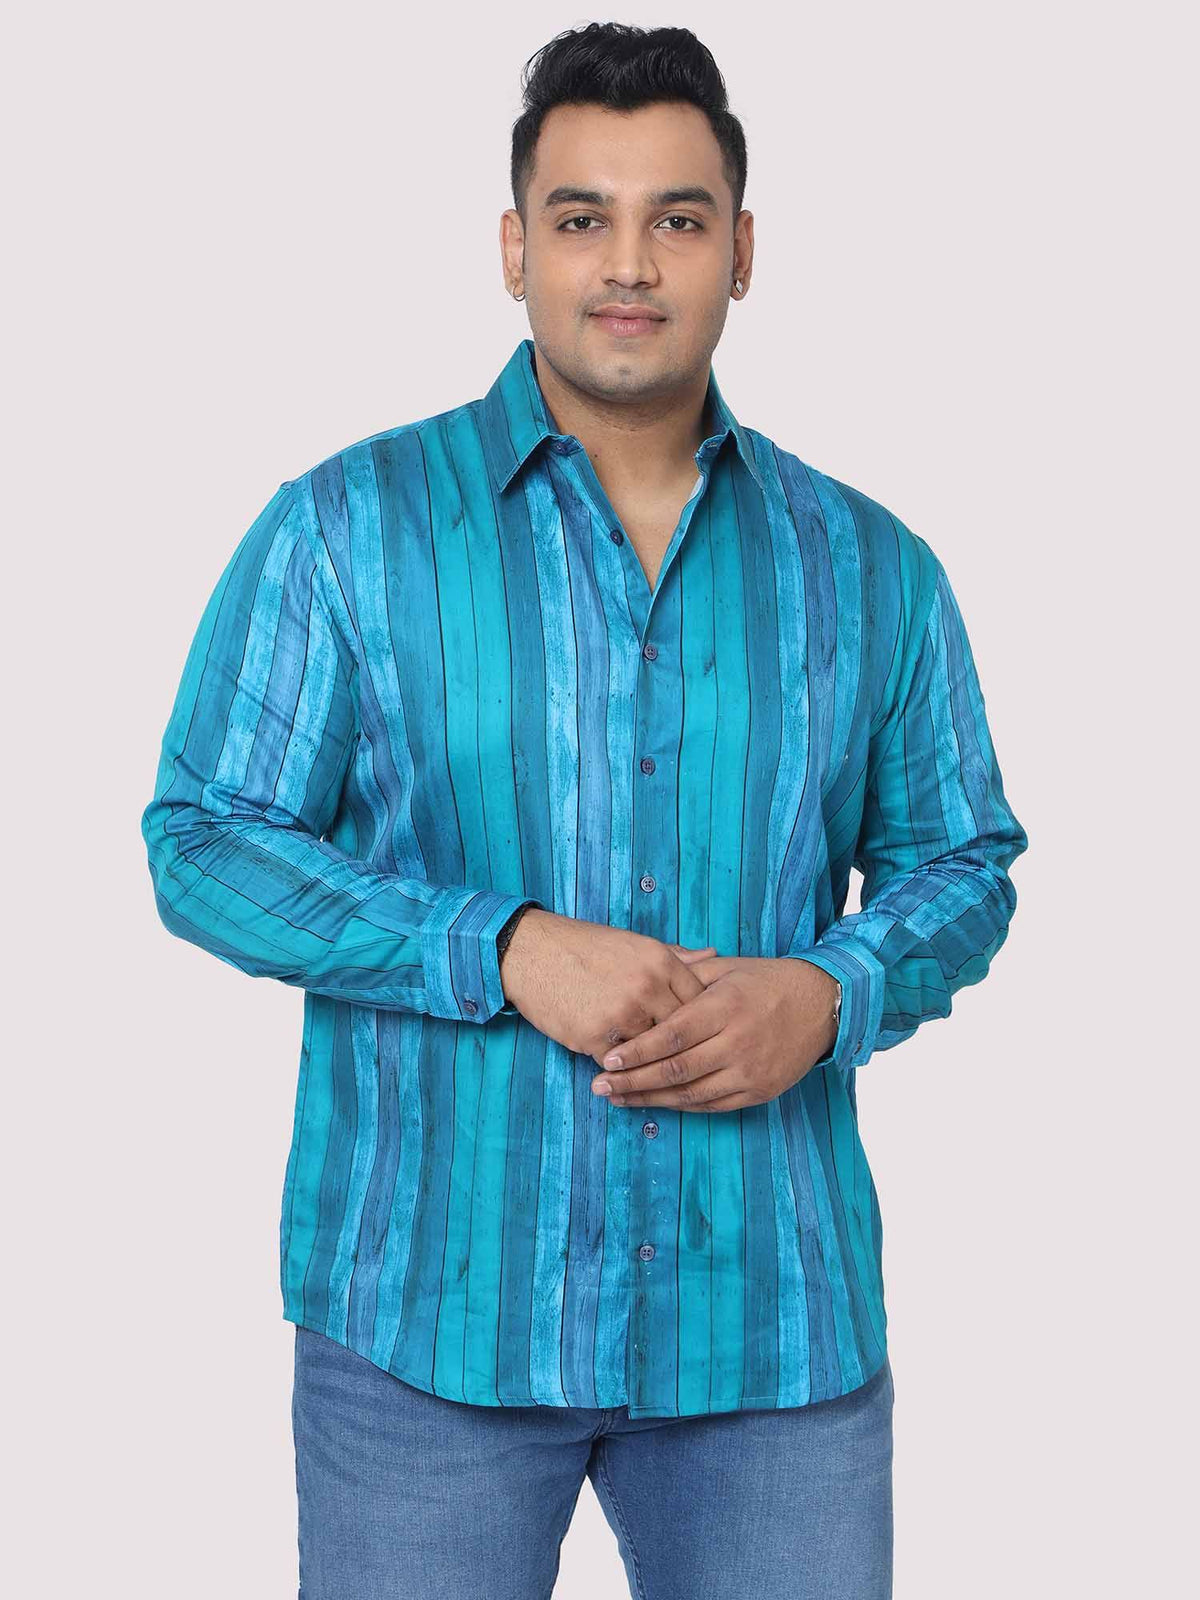 Men's Fashion Cotton Check Shirt, Size: M, L and XL at Rs 500 in